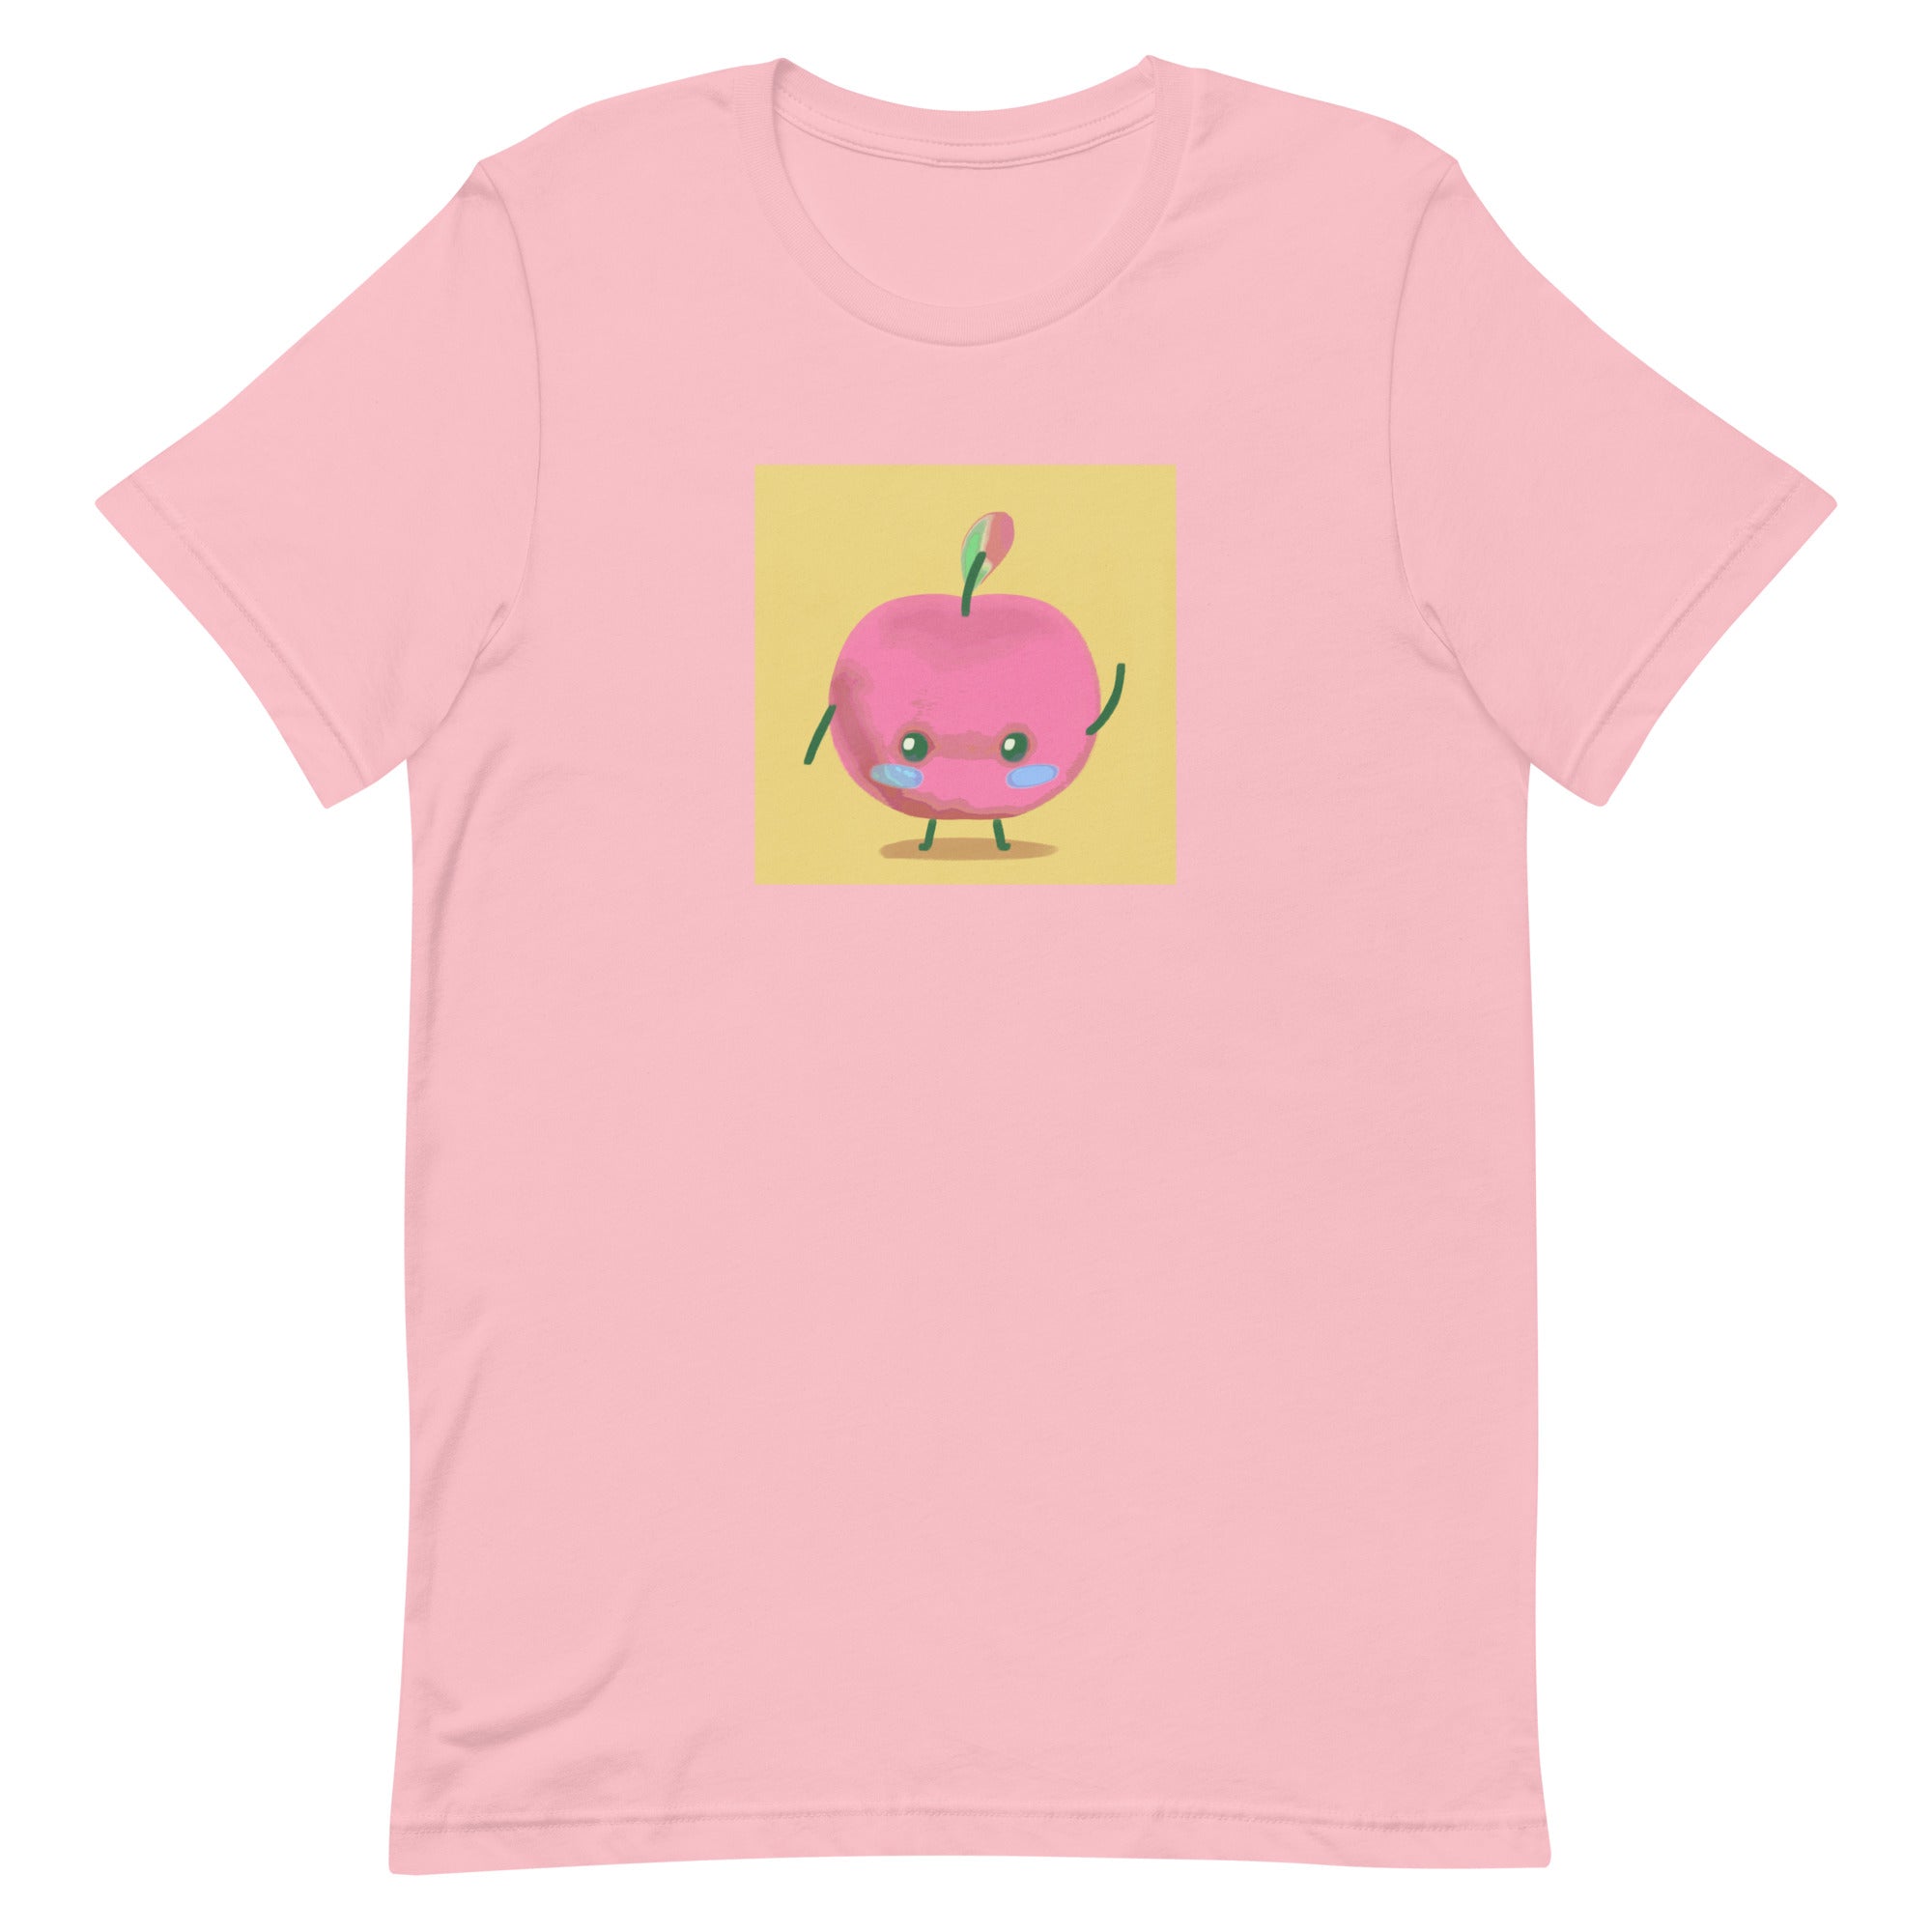 Warhol Junimo | Short-Sleeve Unisex T-Shirt | Stardew Valley Threads and Thistles Inventory Pink S 